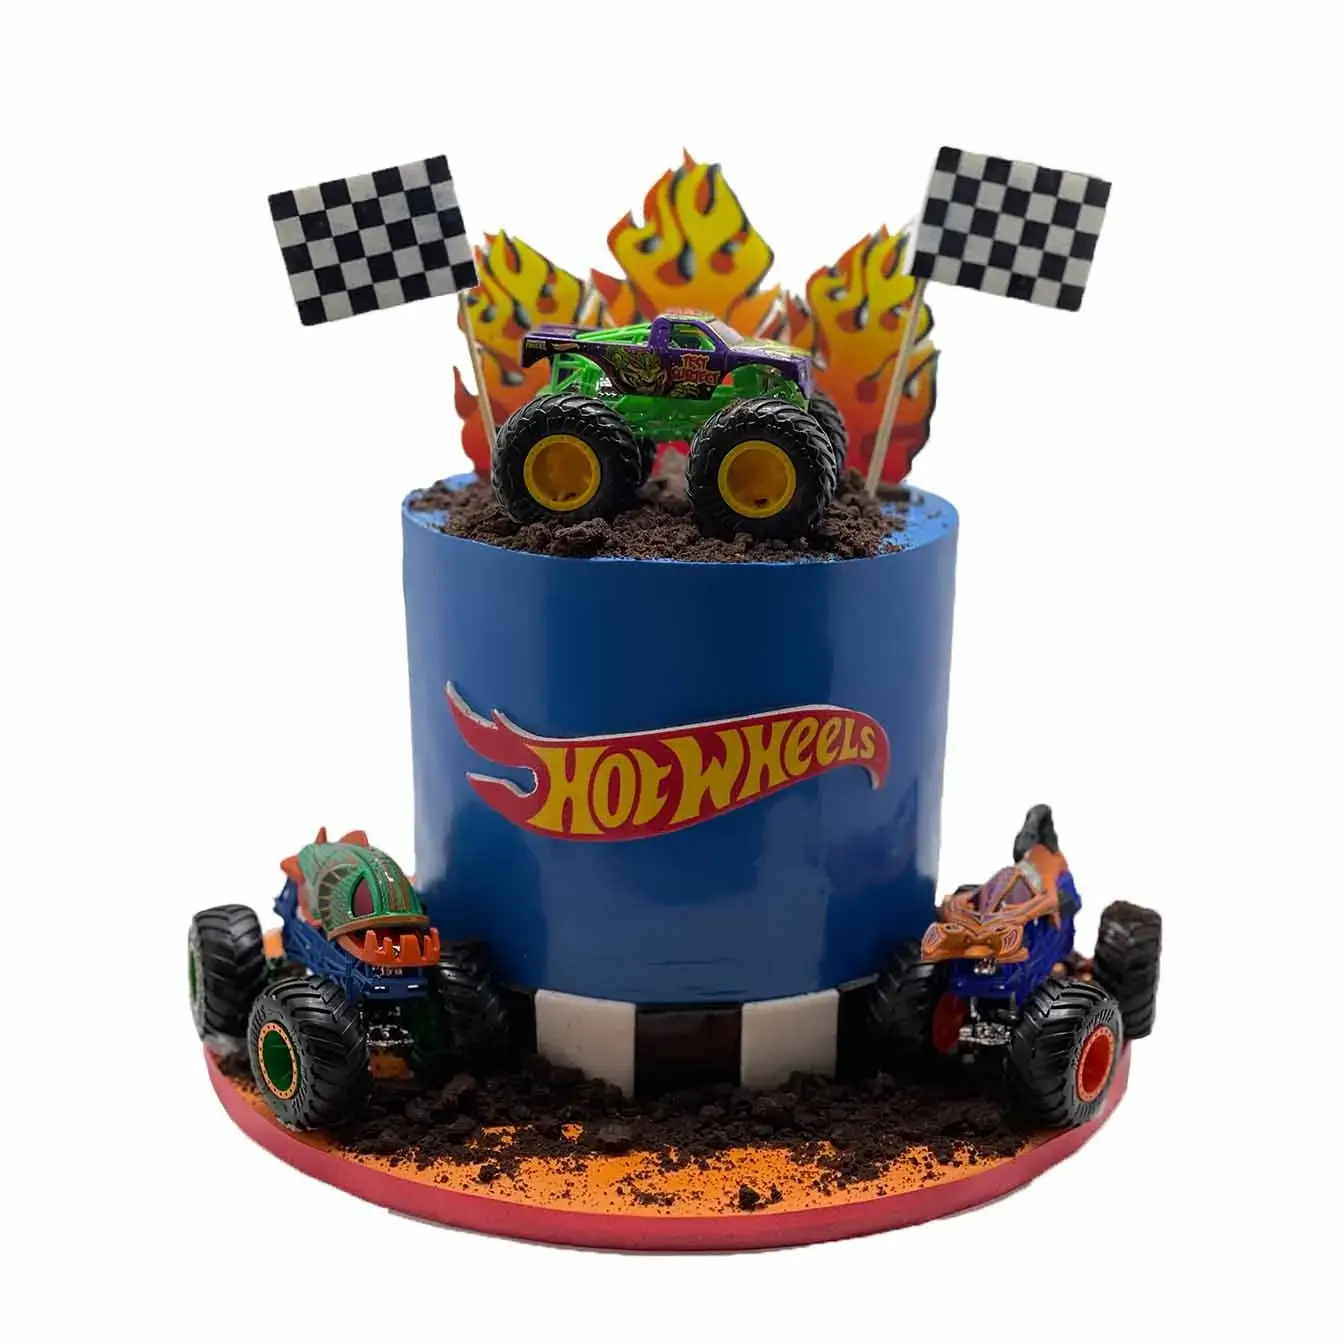 Hot Wheels Monster Truck Rally Cake - A cake featuring a detailed monster truck, a thrilling centerpiece for fans of extreme monster truck action and high-octane celebrations.